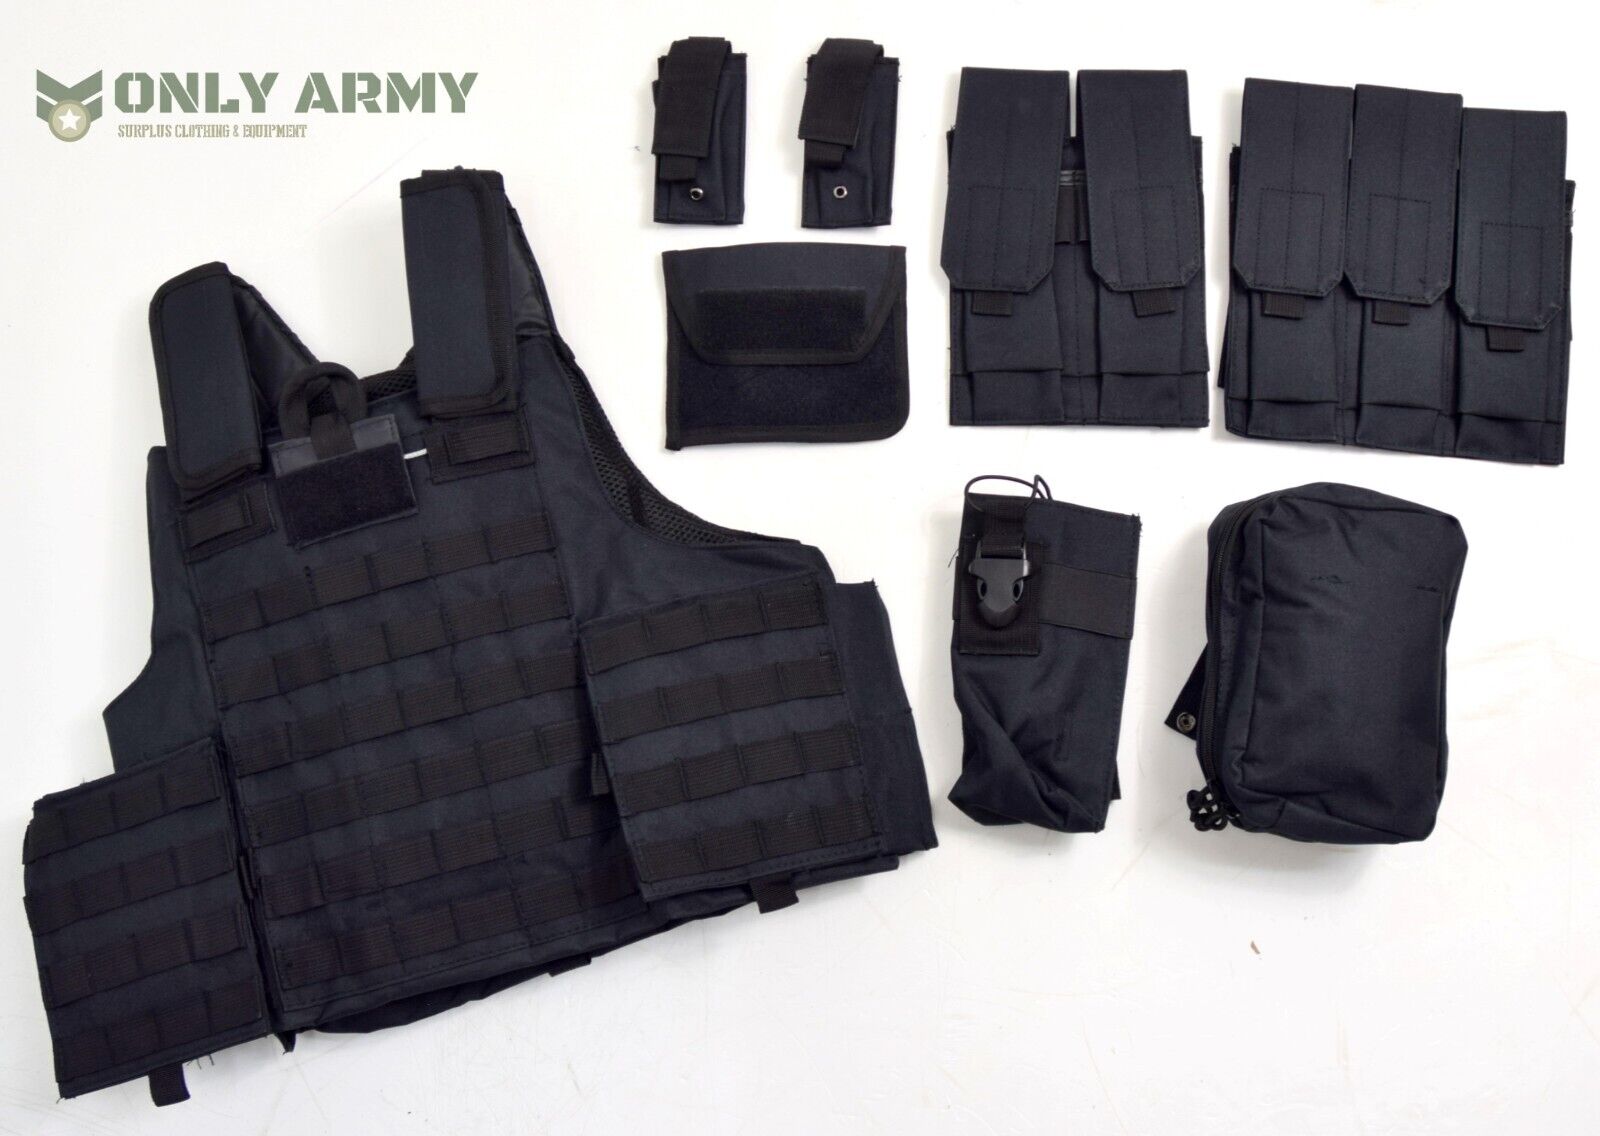 British Army SAS SF Style Complete MOLLE Combat Vest With Pouches Black Airsoft